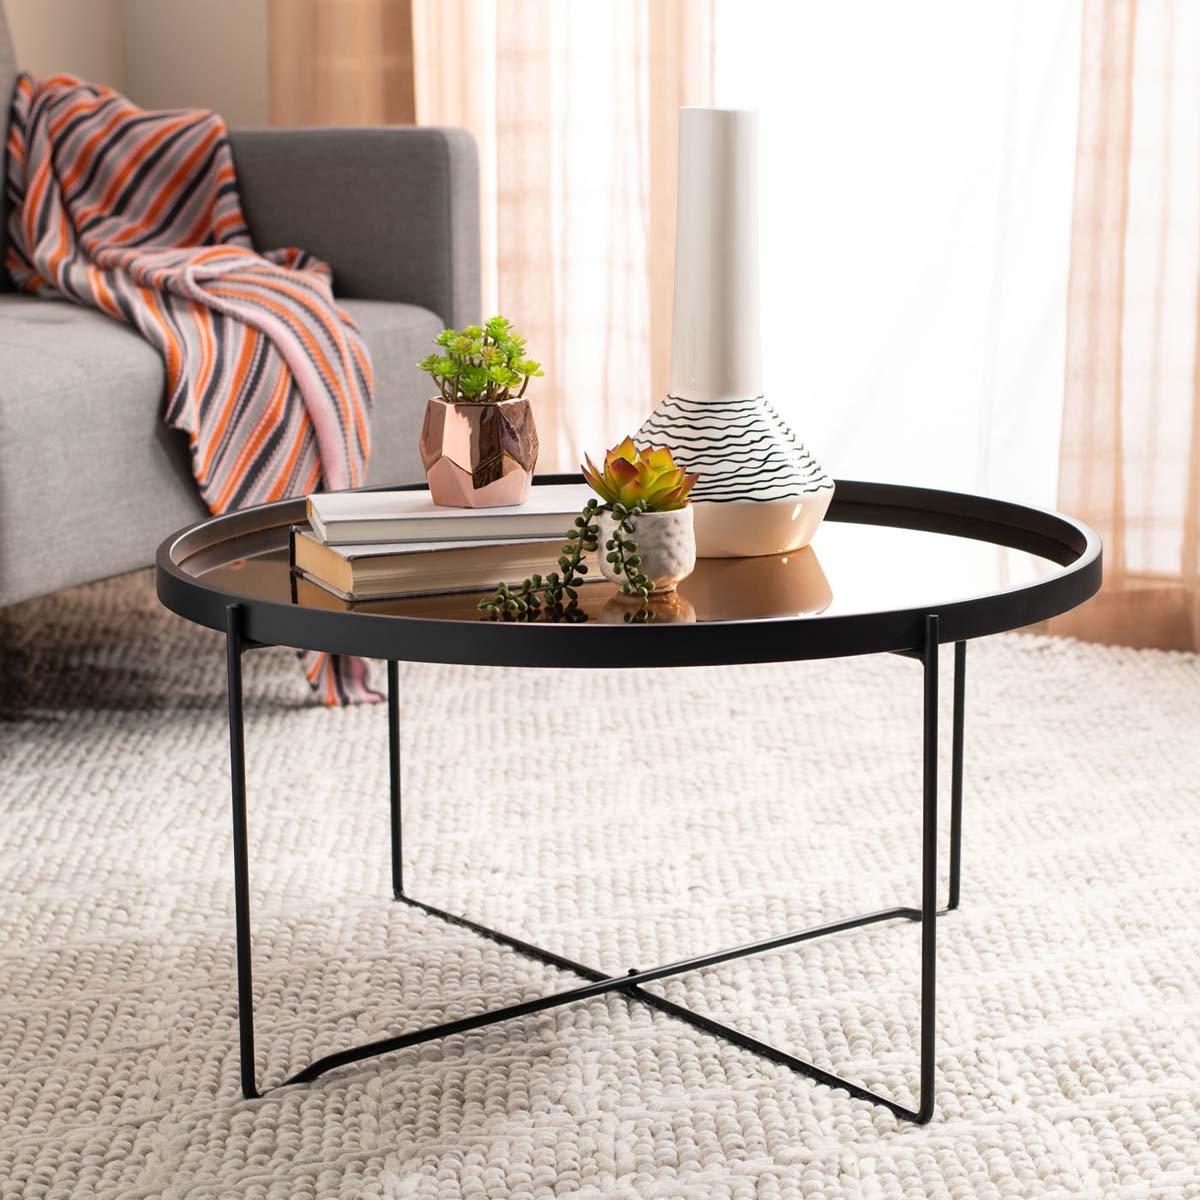 Safavieh Ruby Round Tray Top Coffee Table , COF4205 - Rose Gold/Black